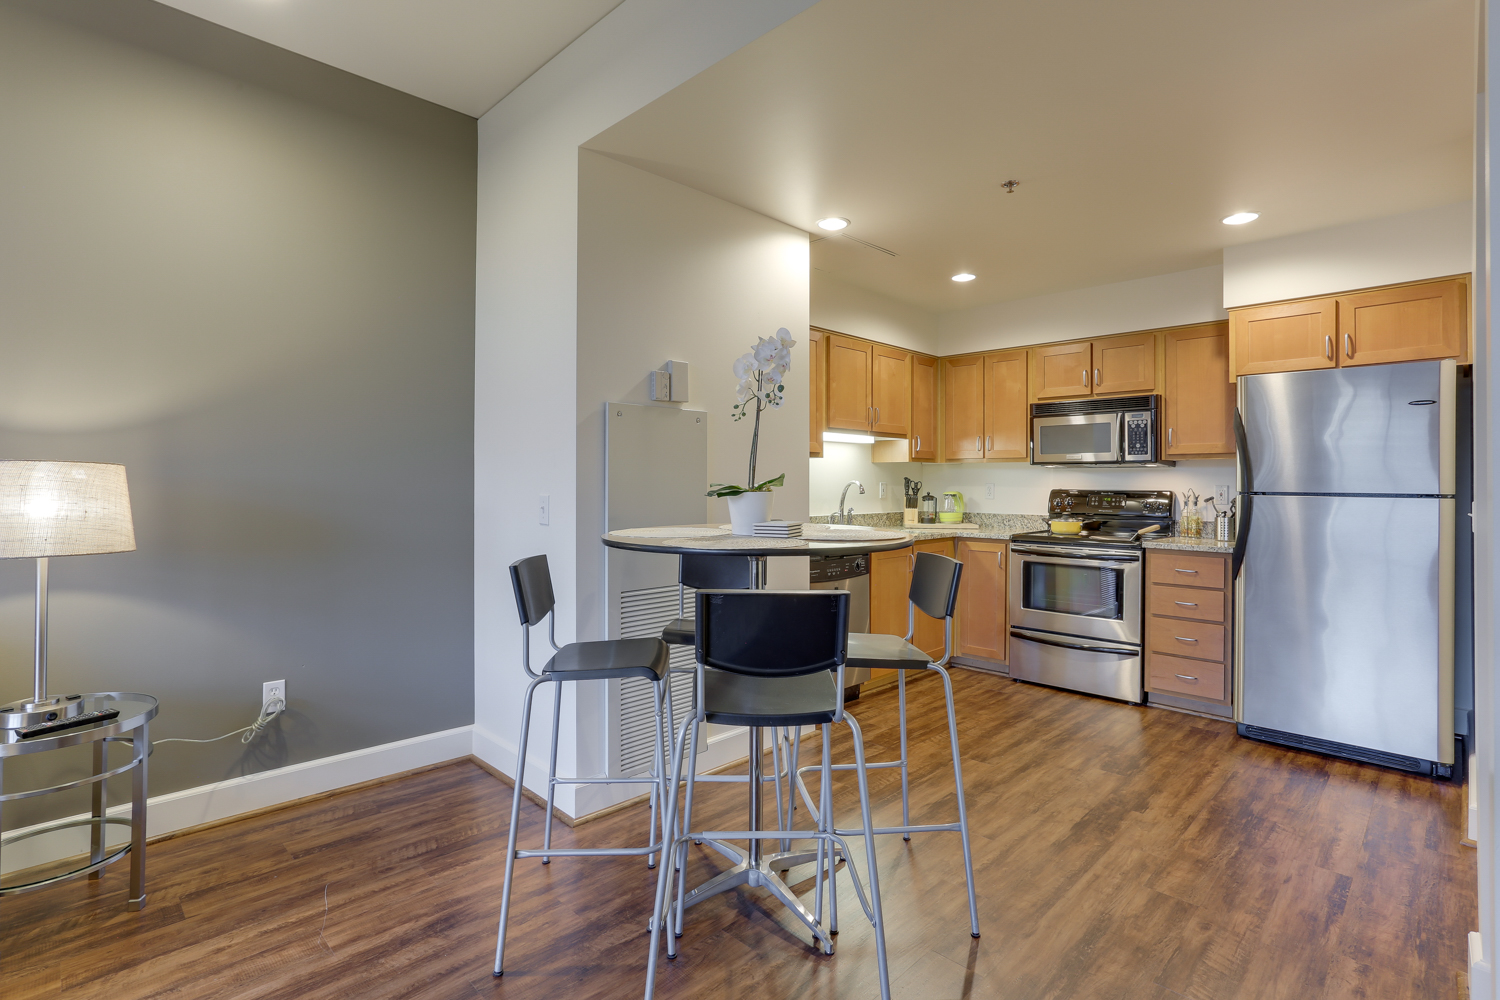 Gorgeous 1BR Apt in the heart of Downtown PDX 2